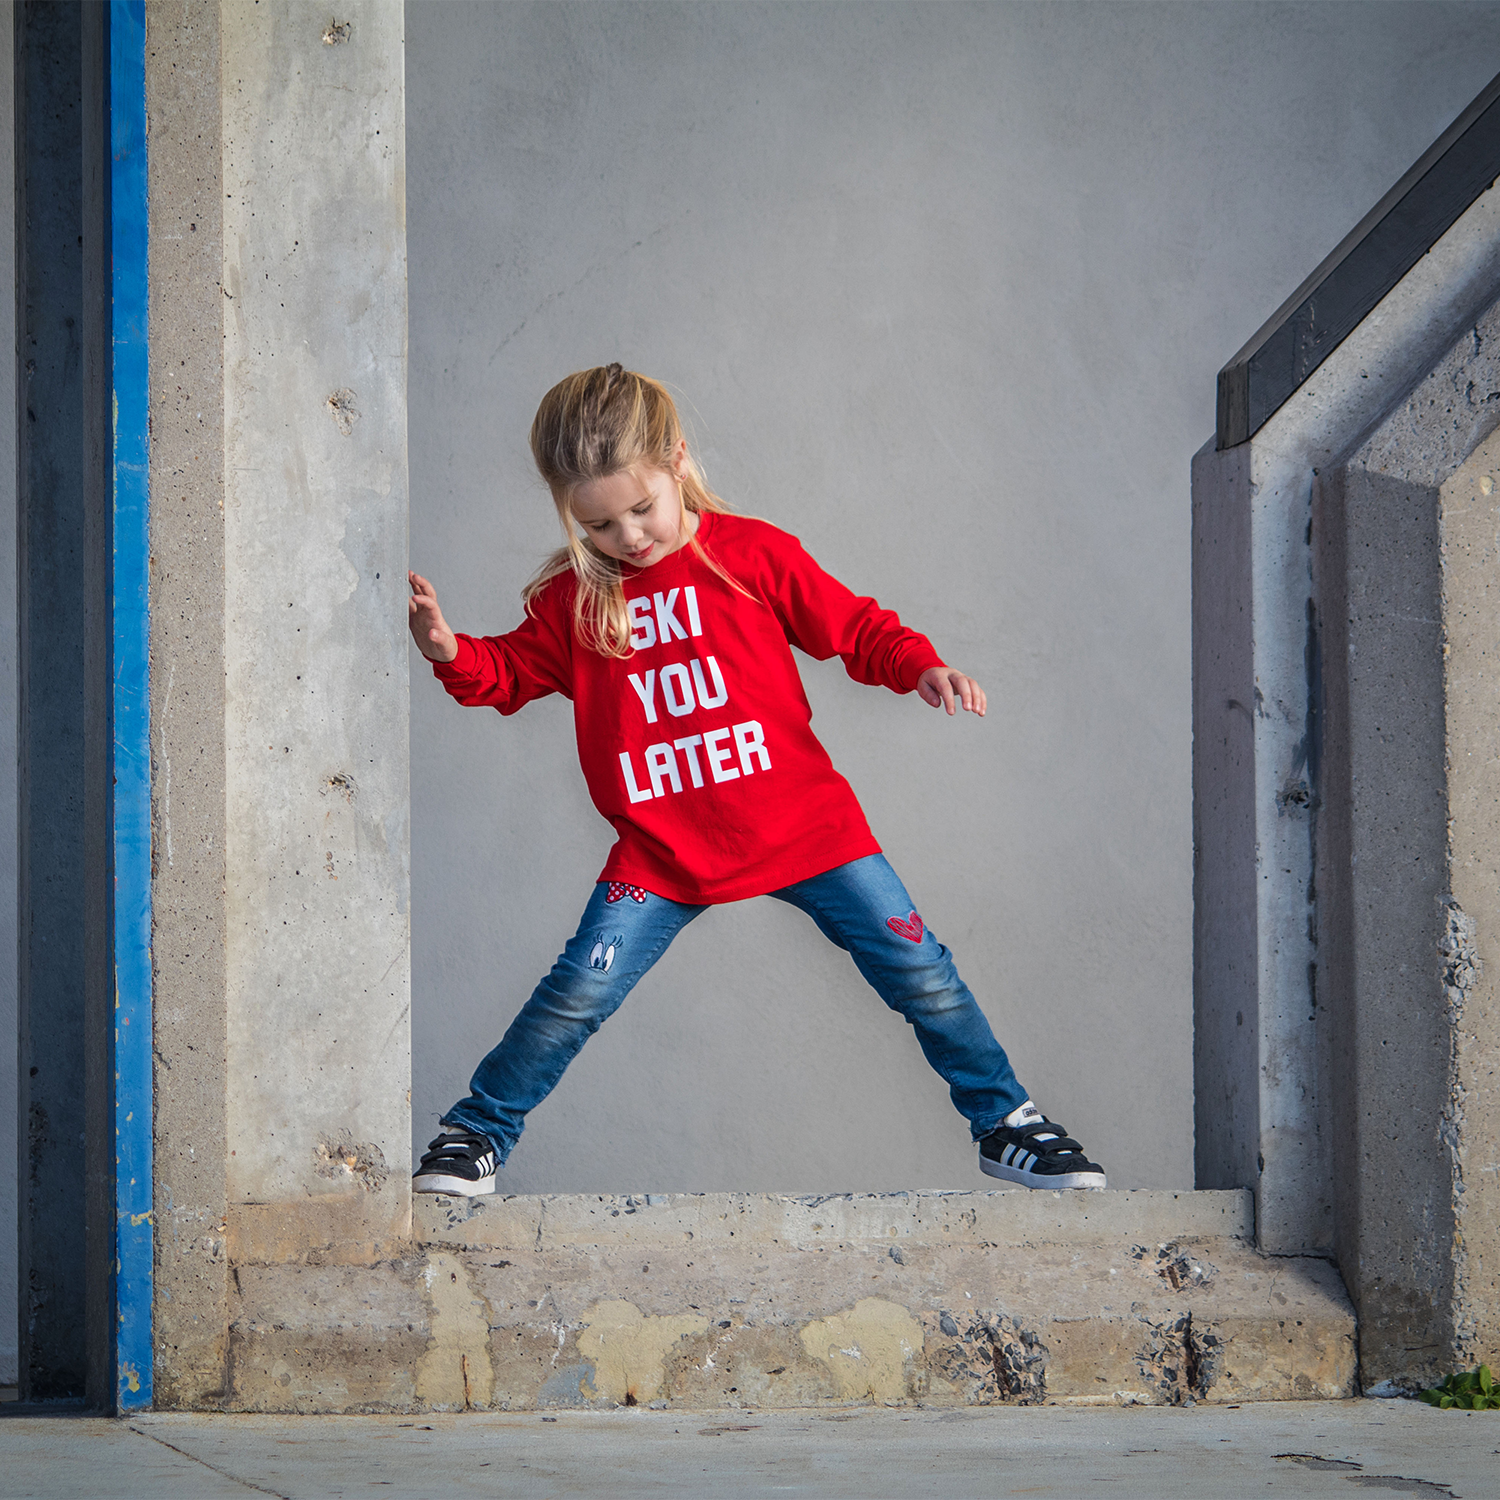 Blonde girl with red shirt with 'Ski je later' print by KMLeon standing on concrete.